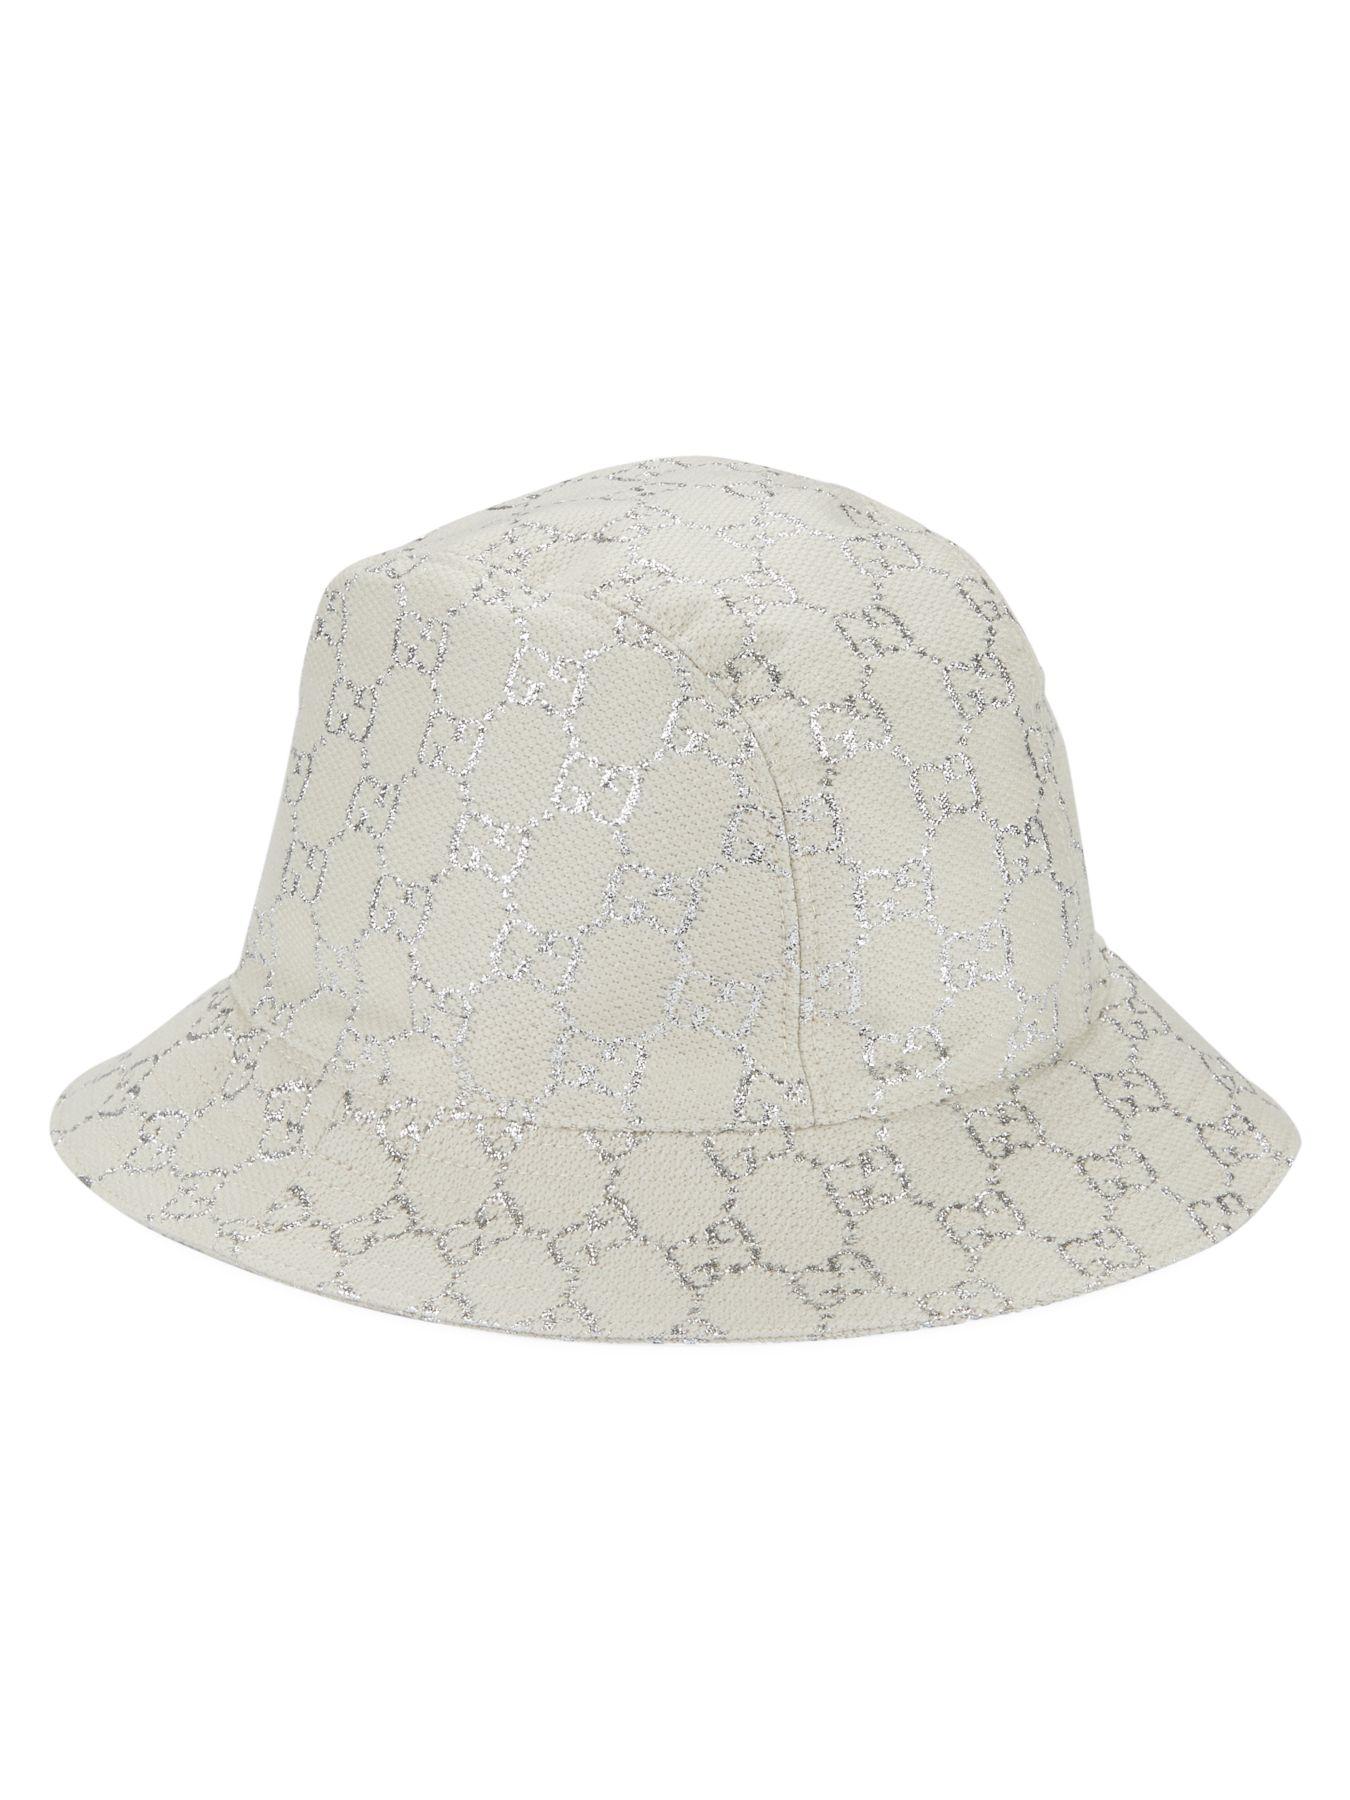 Gucci Synthetic GG Lamé Bucket Hat in White - Lyst